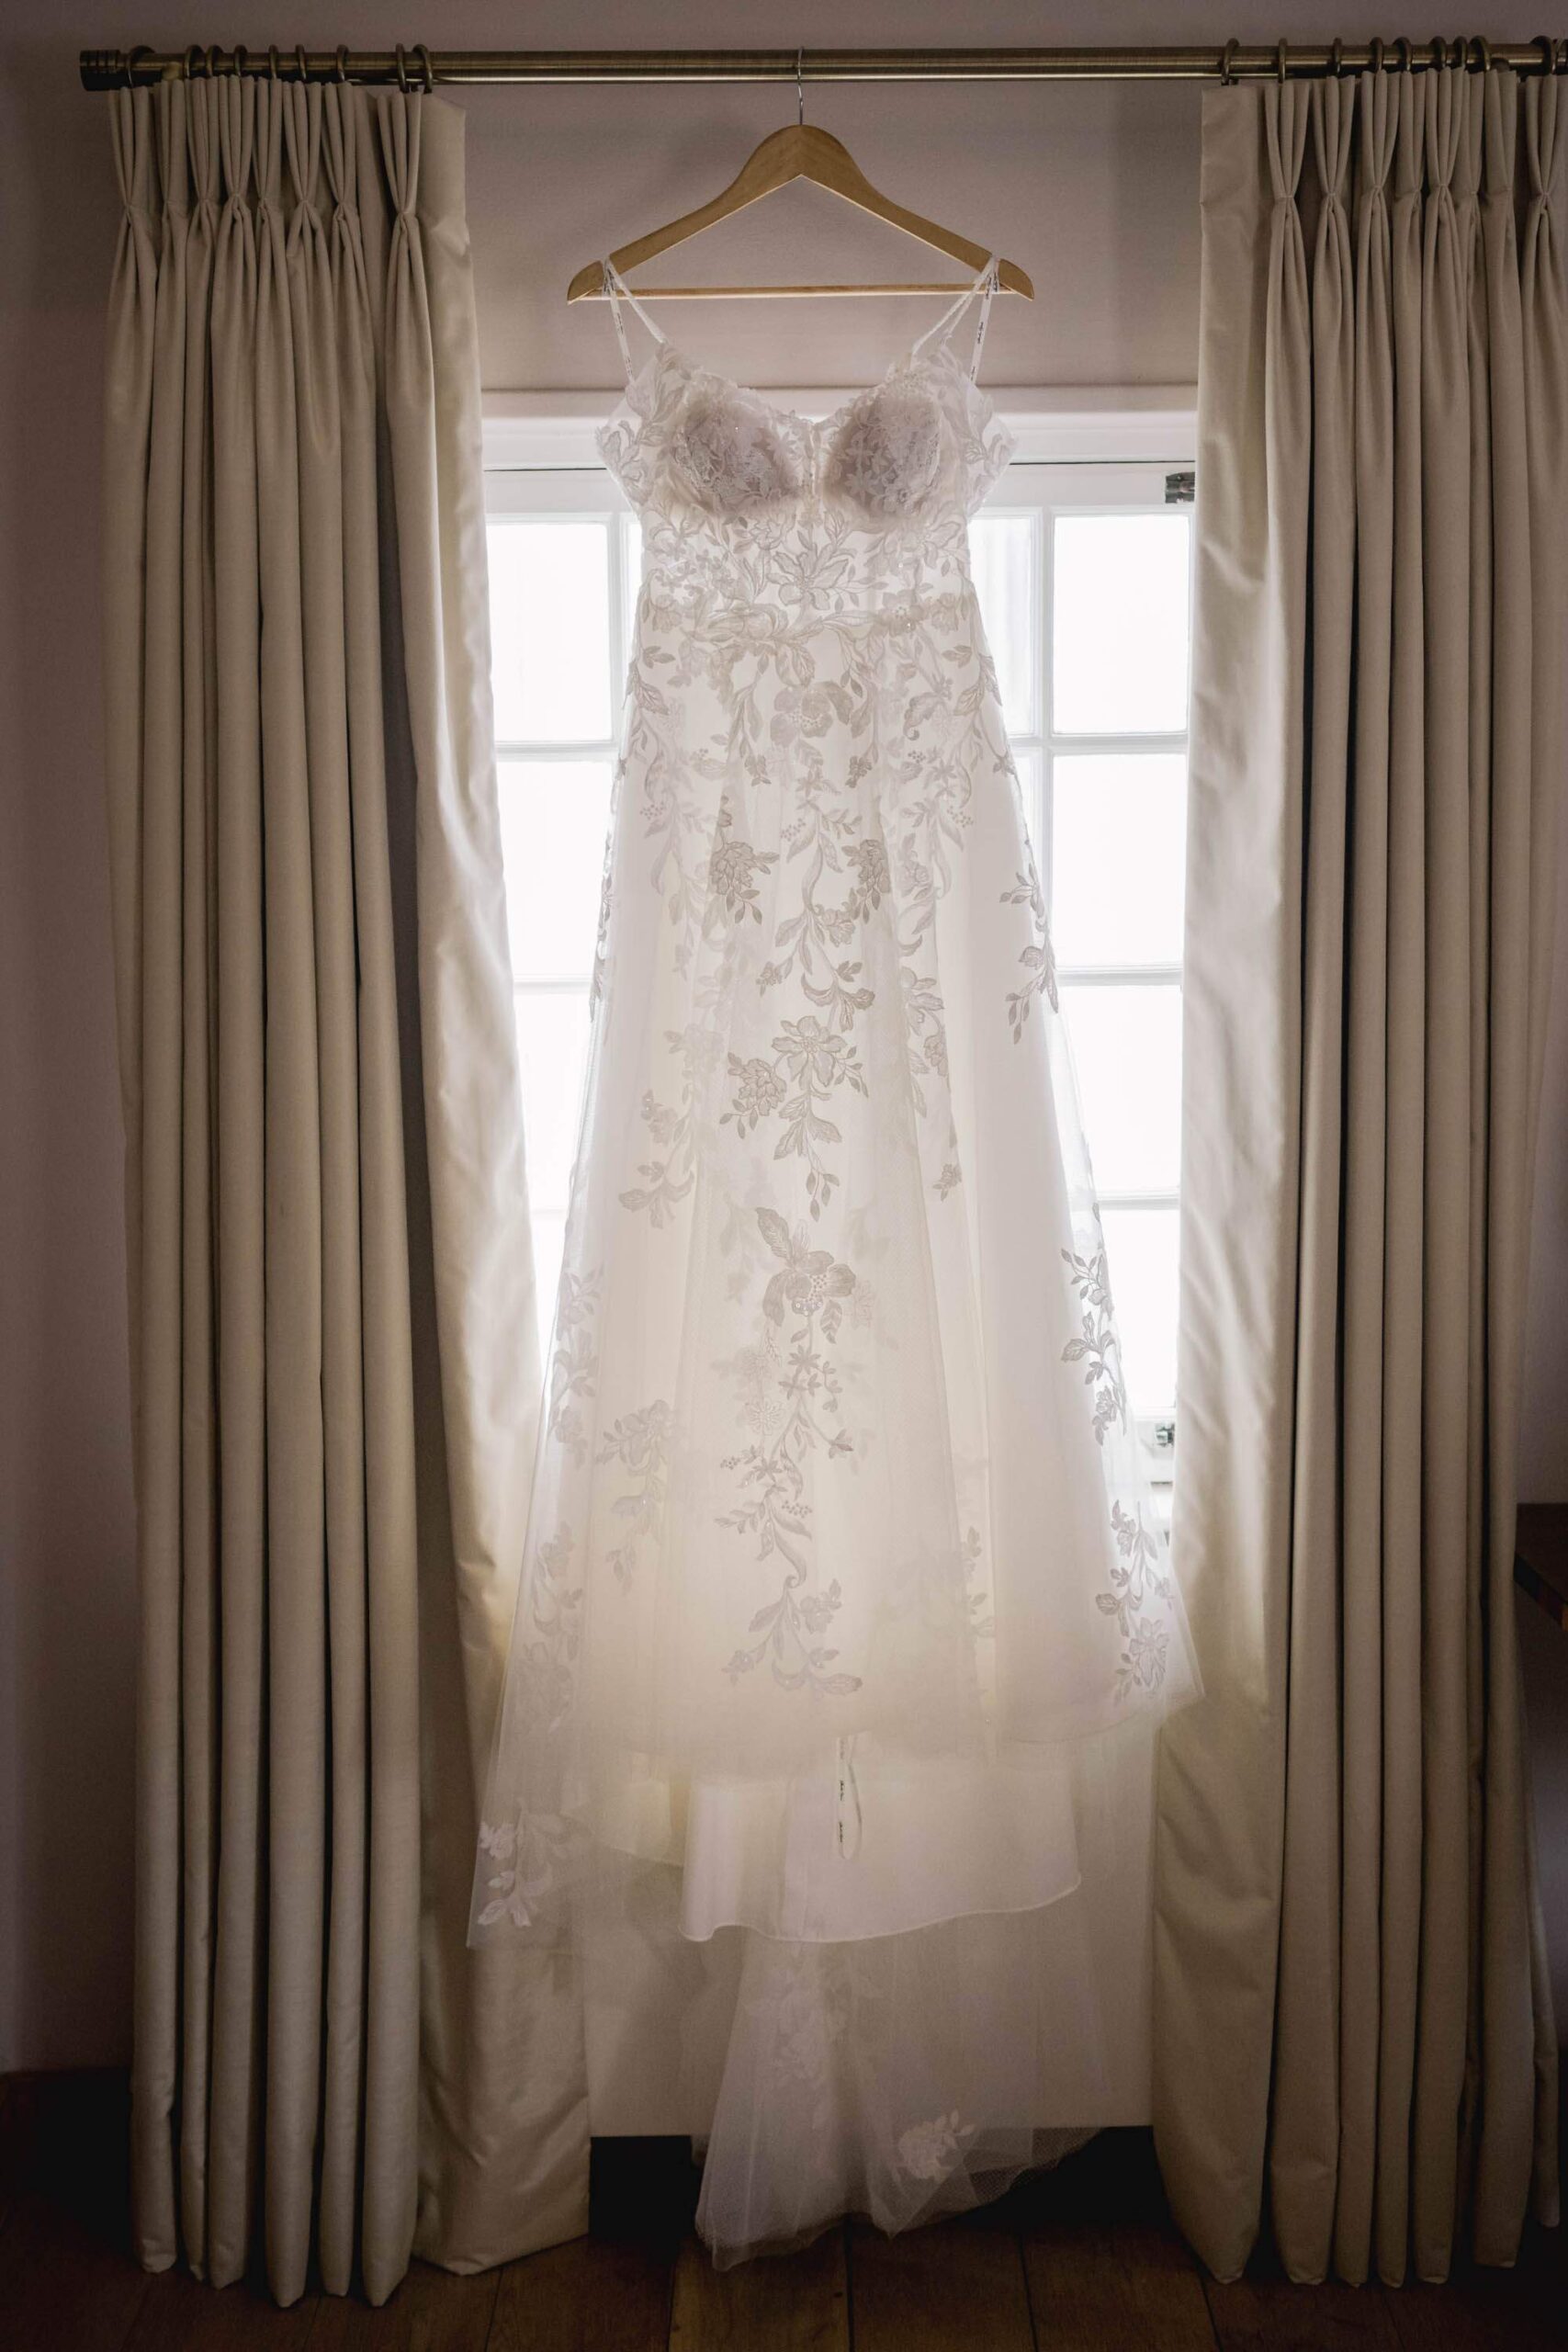 Wedding dress hanging up at the window at Pelham House in Lewes.